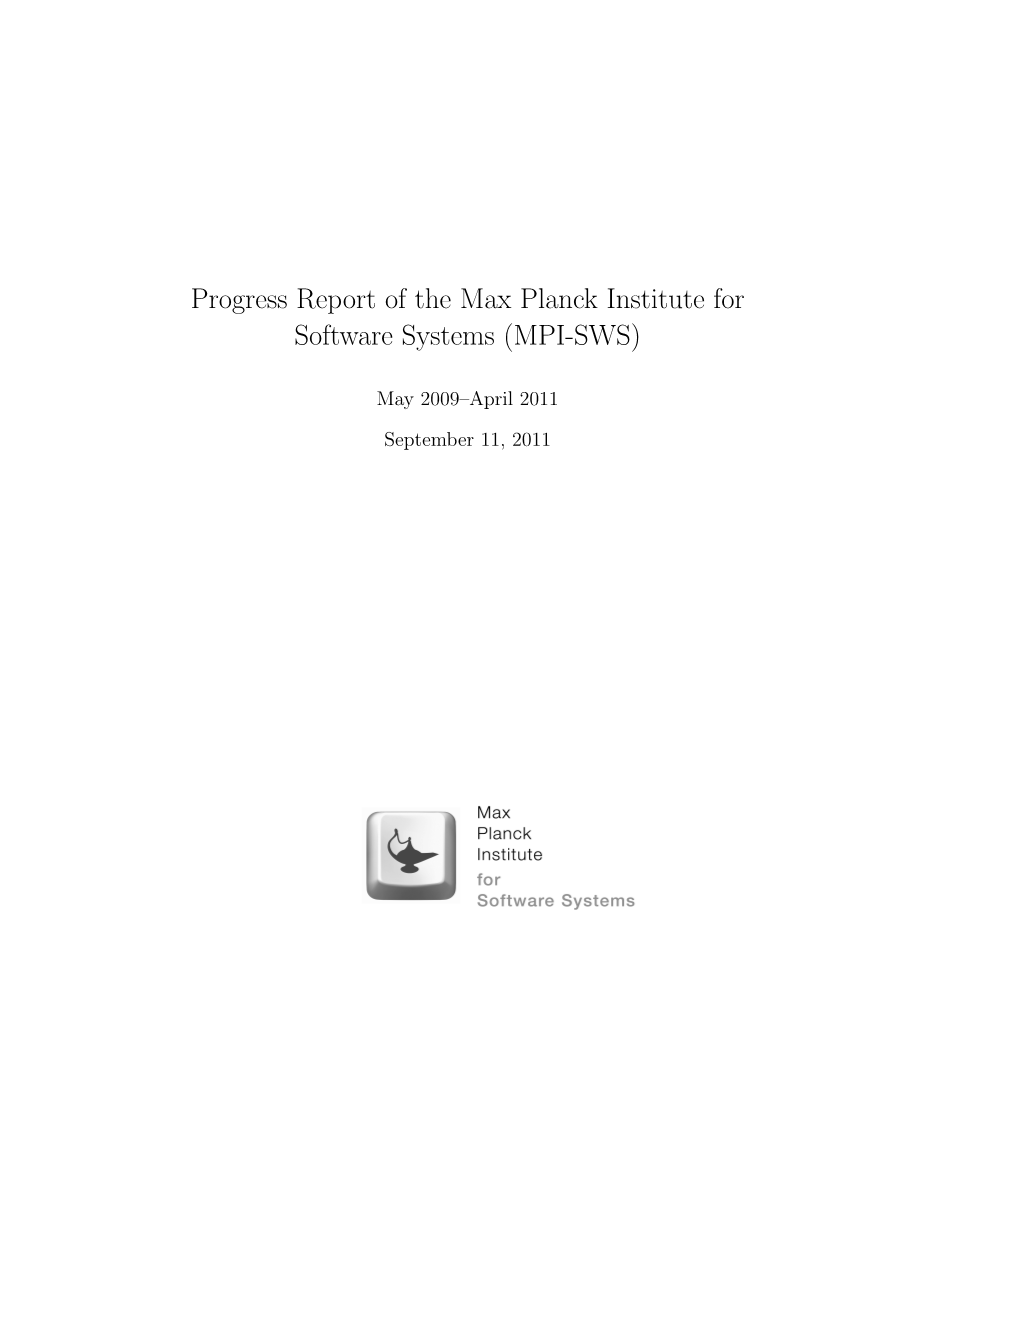 Progress Report of the Max Planck Institute for Software Systems (MPI-SWS)